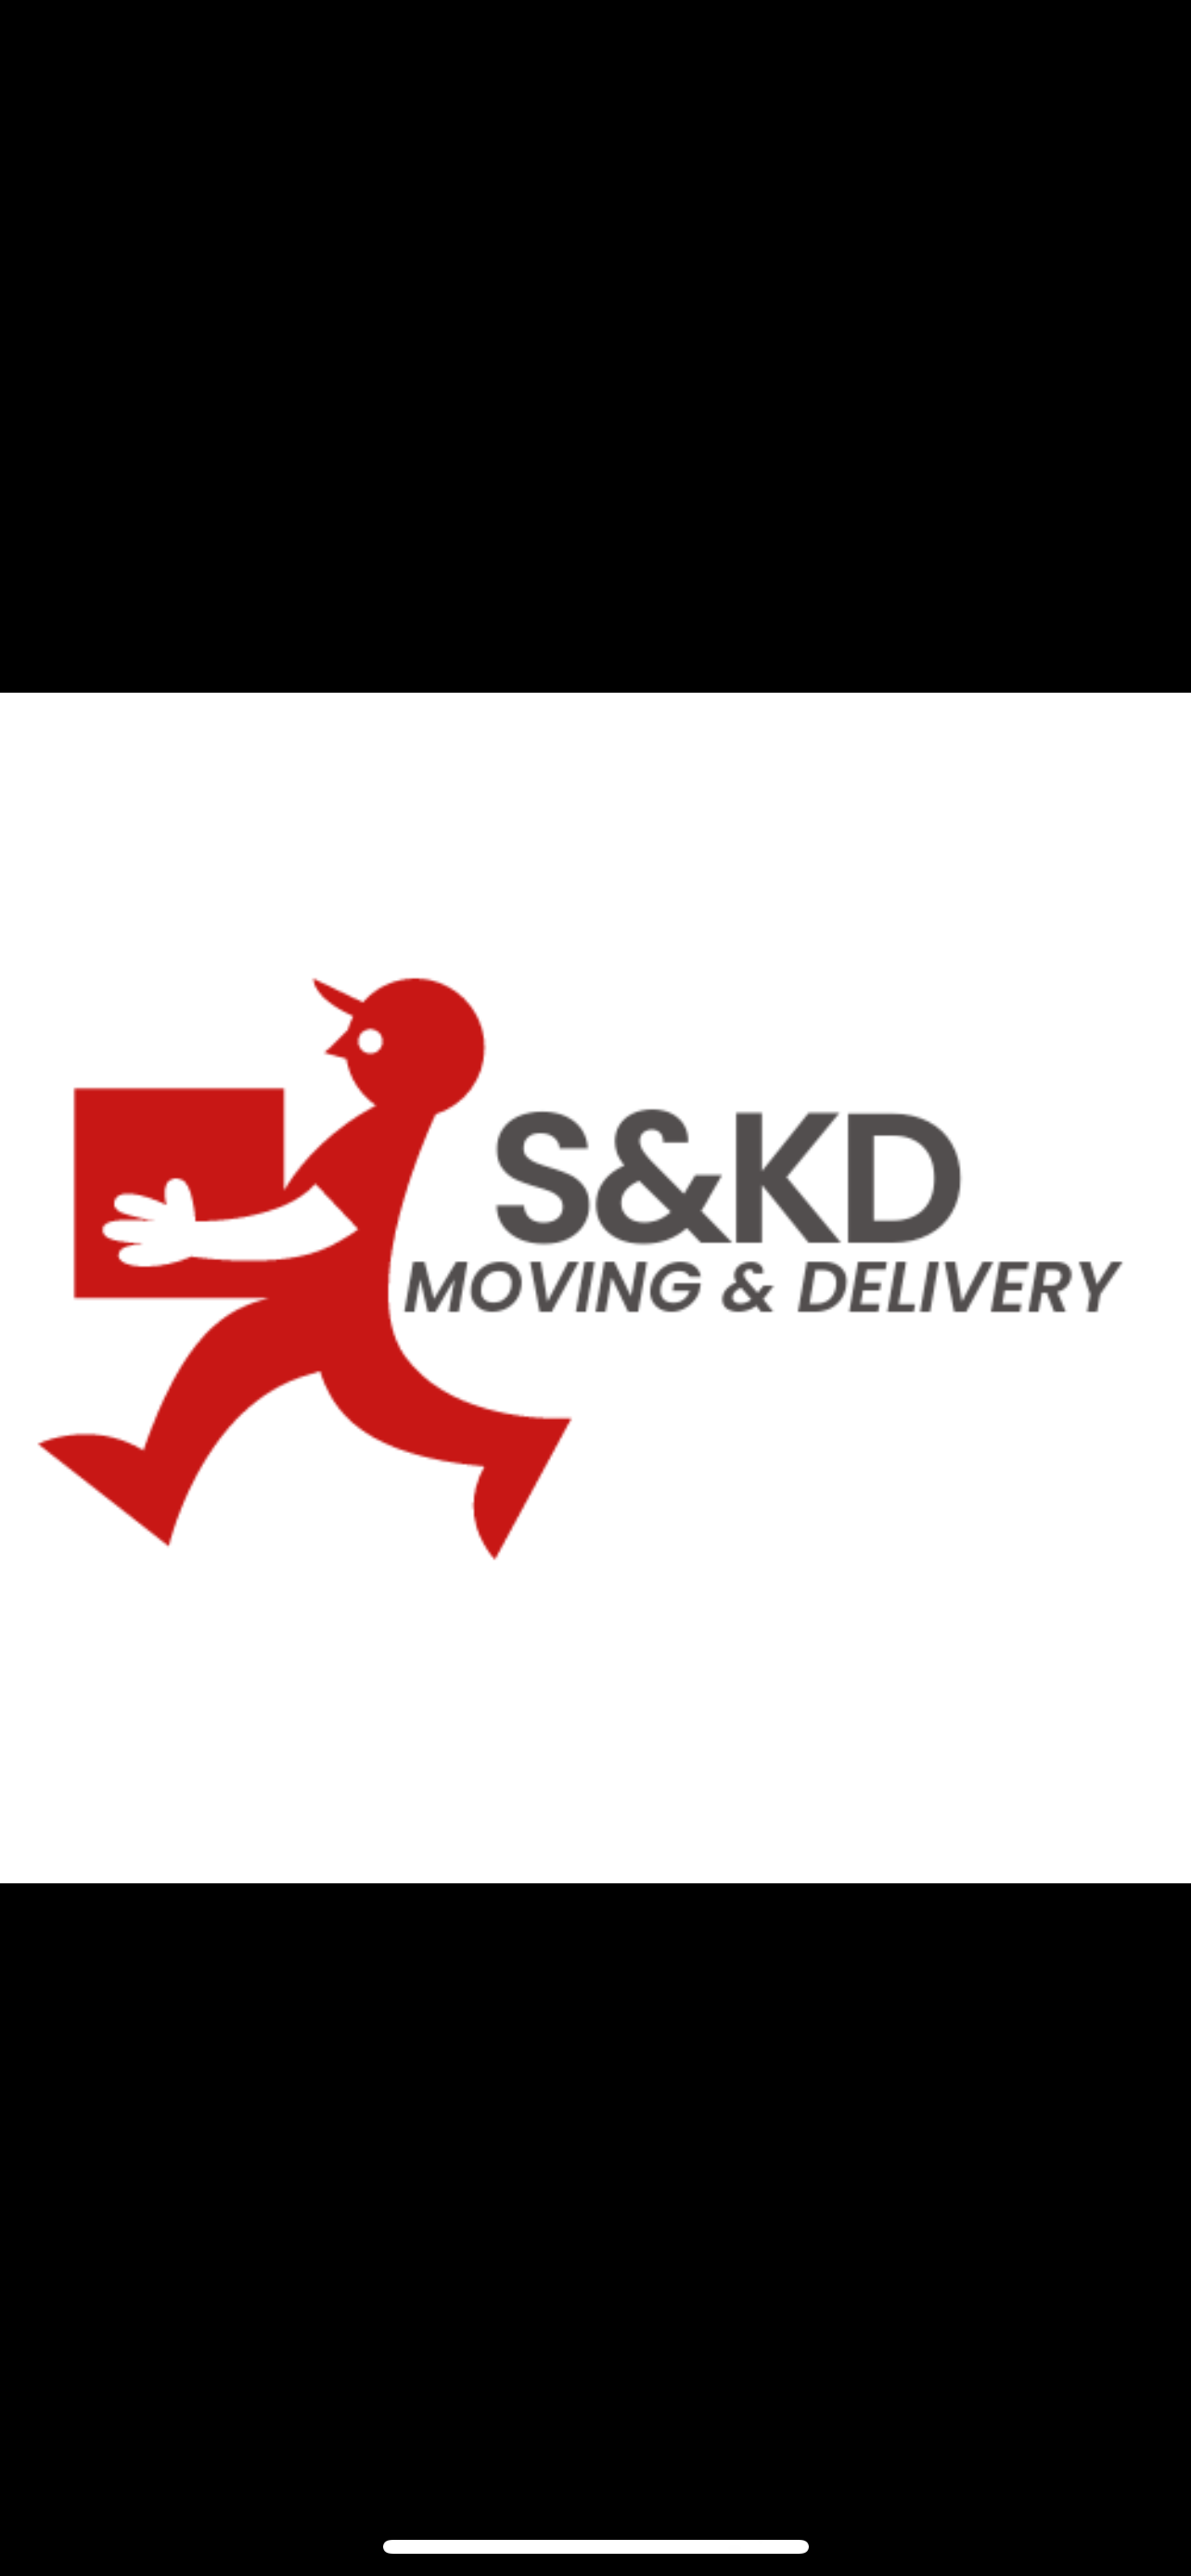 S&KD Moving And Delivery